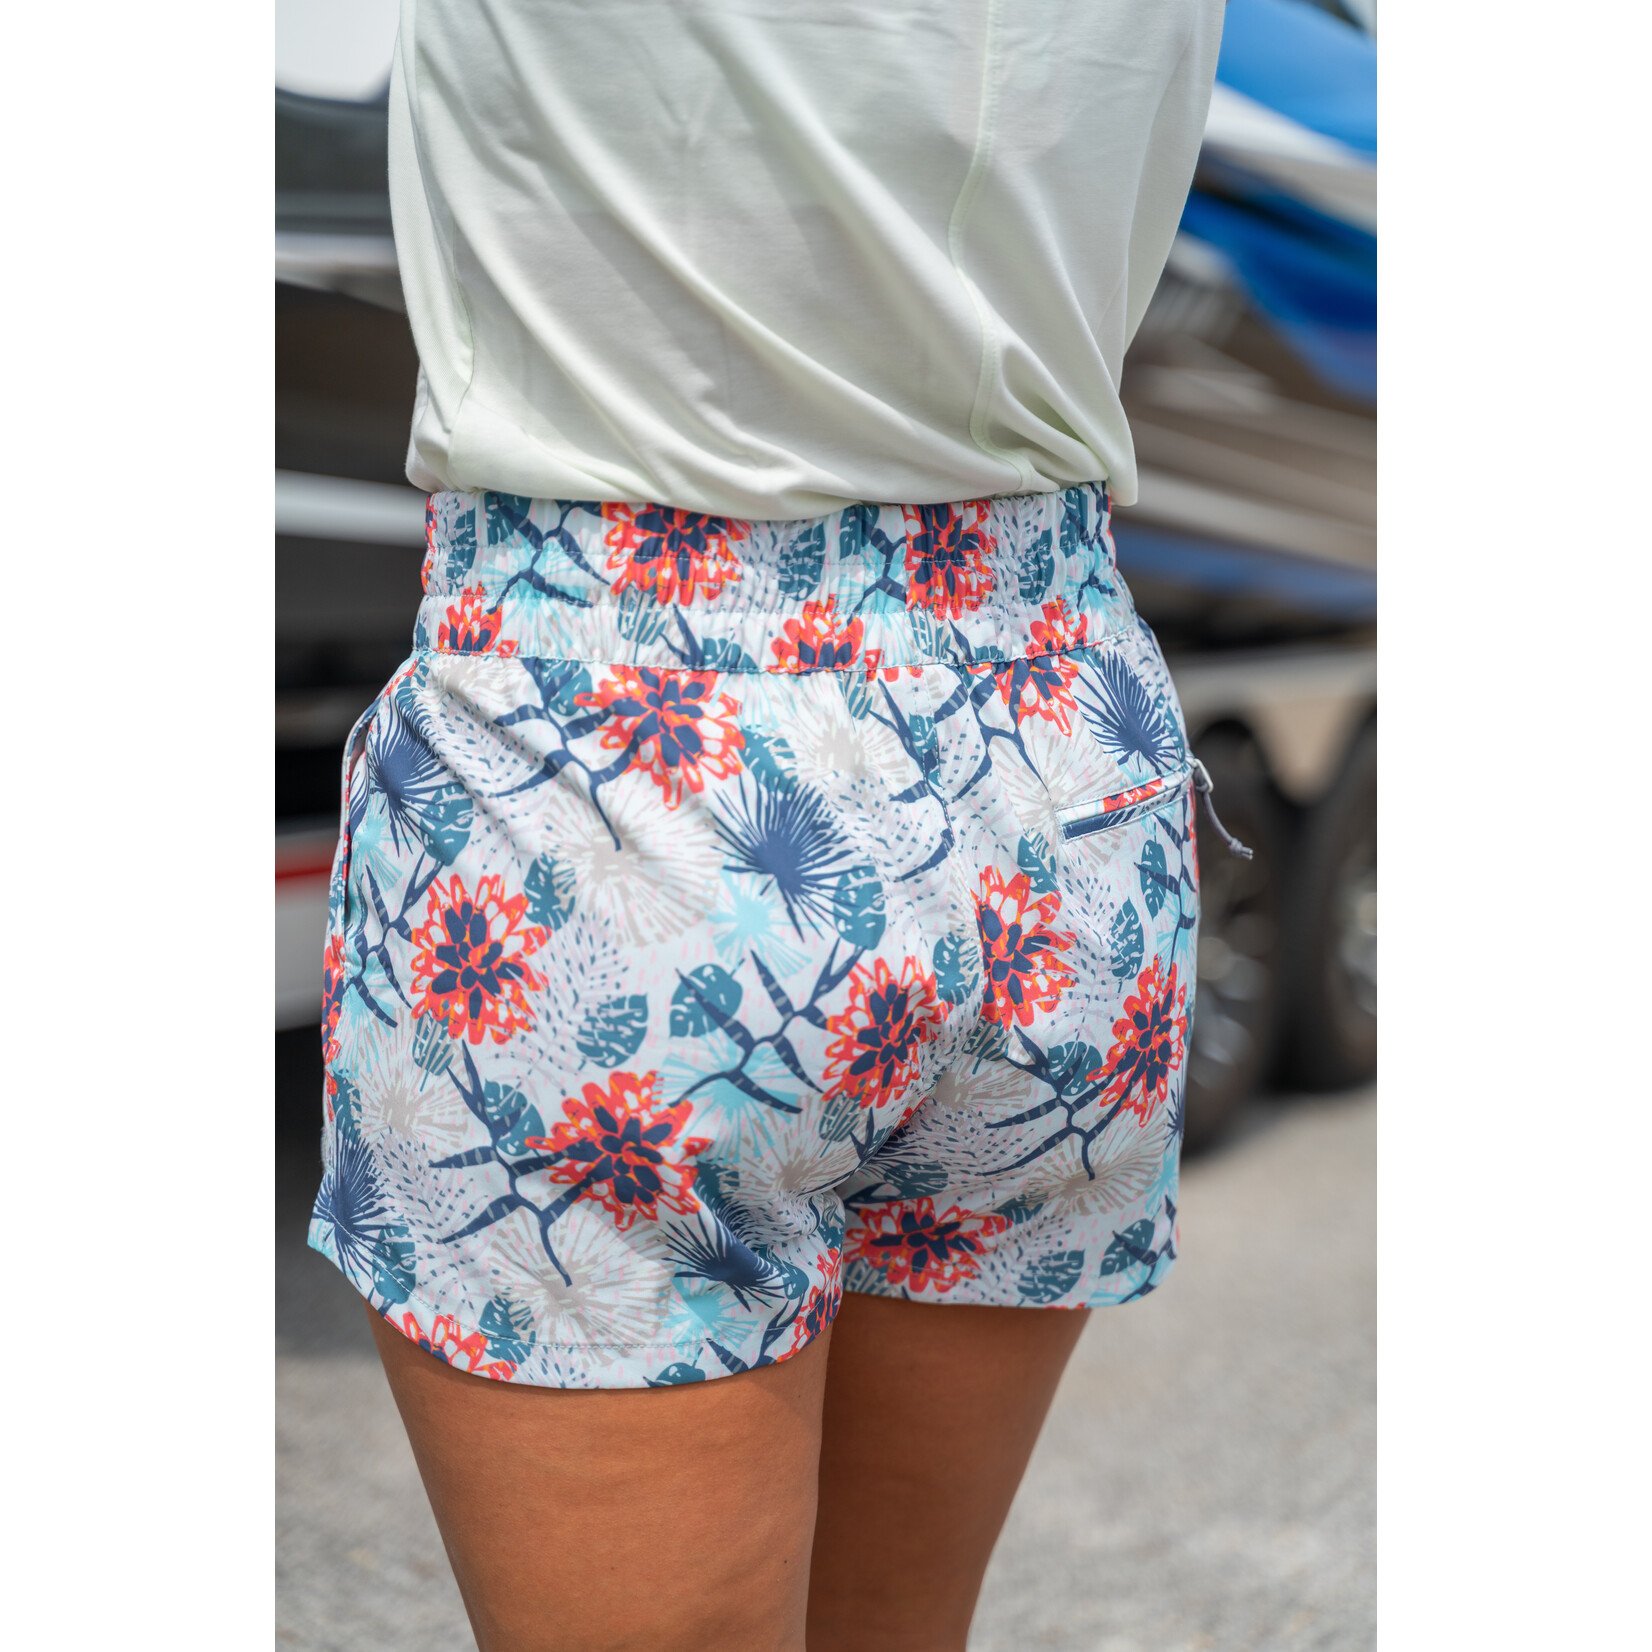 Aftco Aftco Women's Strike Short Printed Shorts